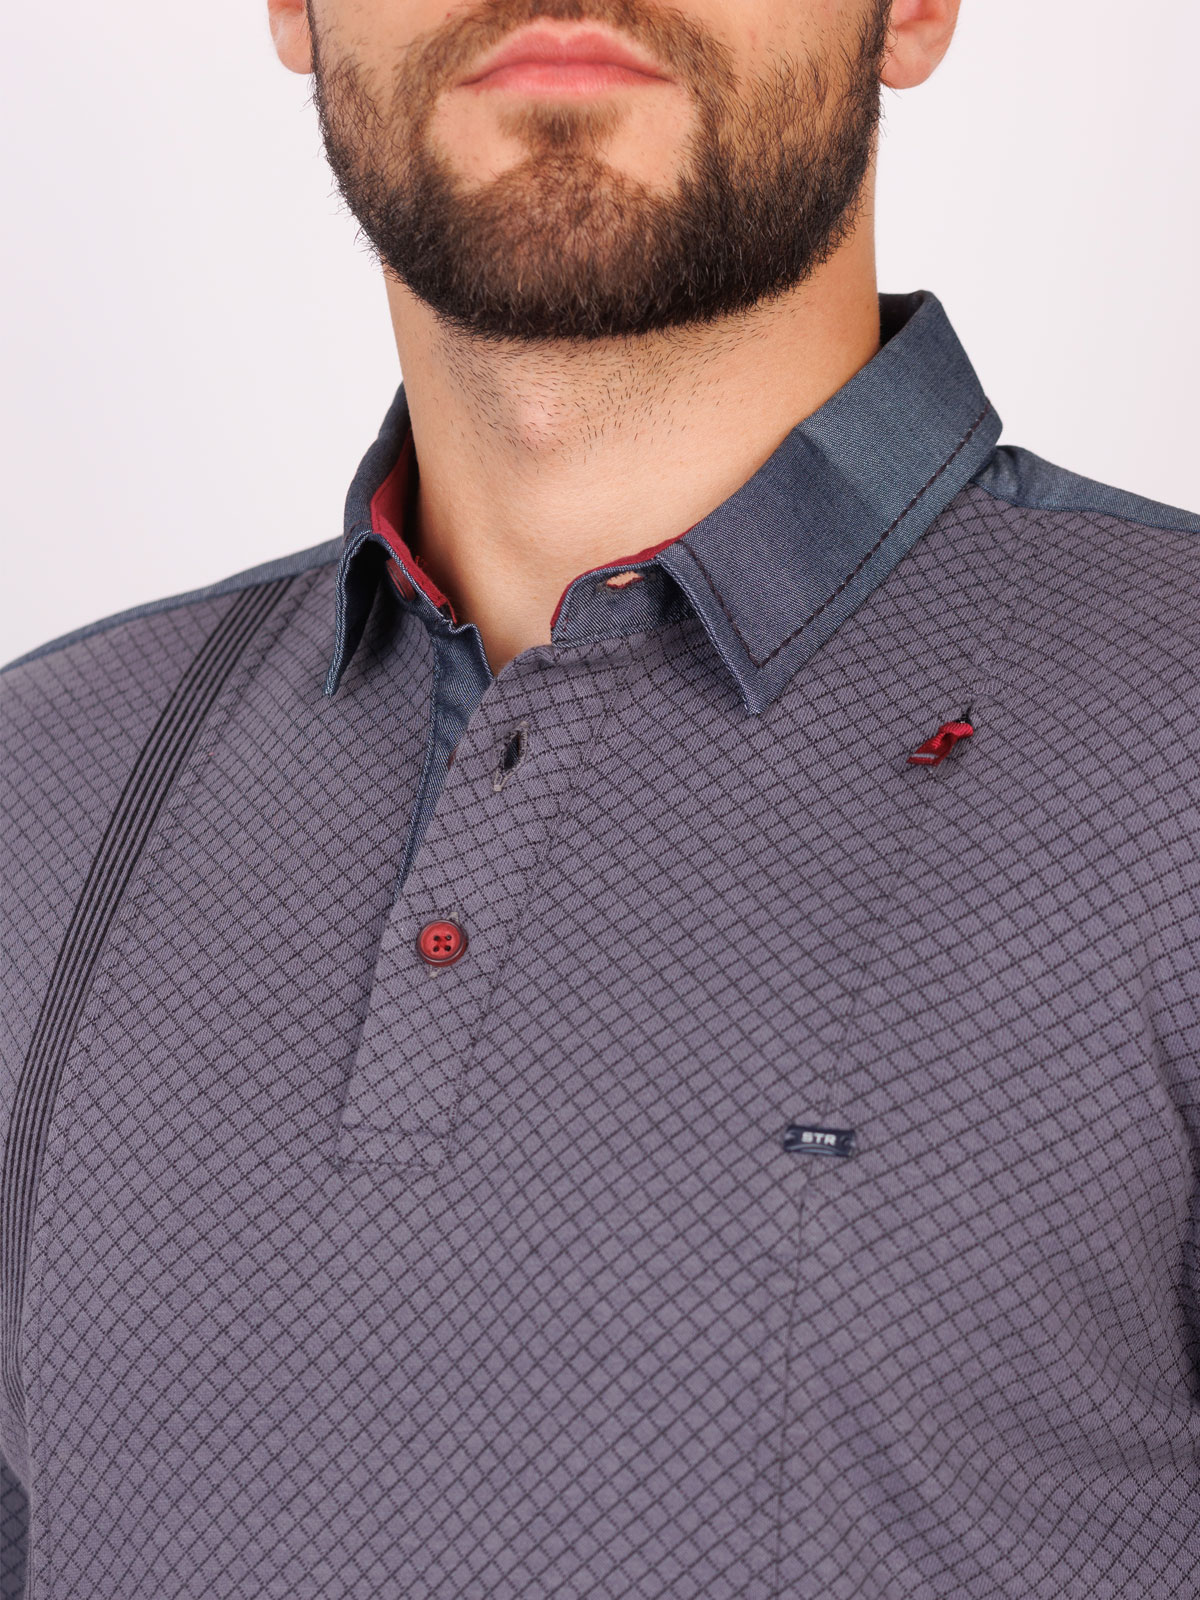 Mens blouse with hidden pocket - 18261 € 27.56 img3